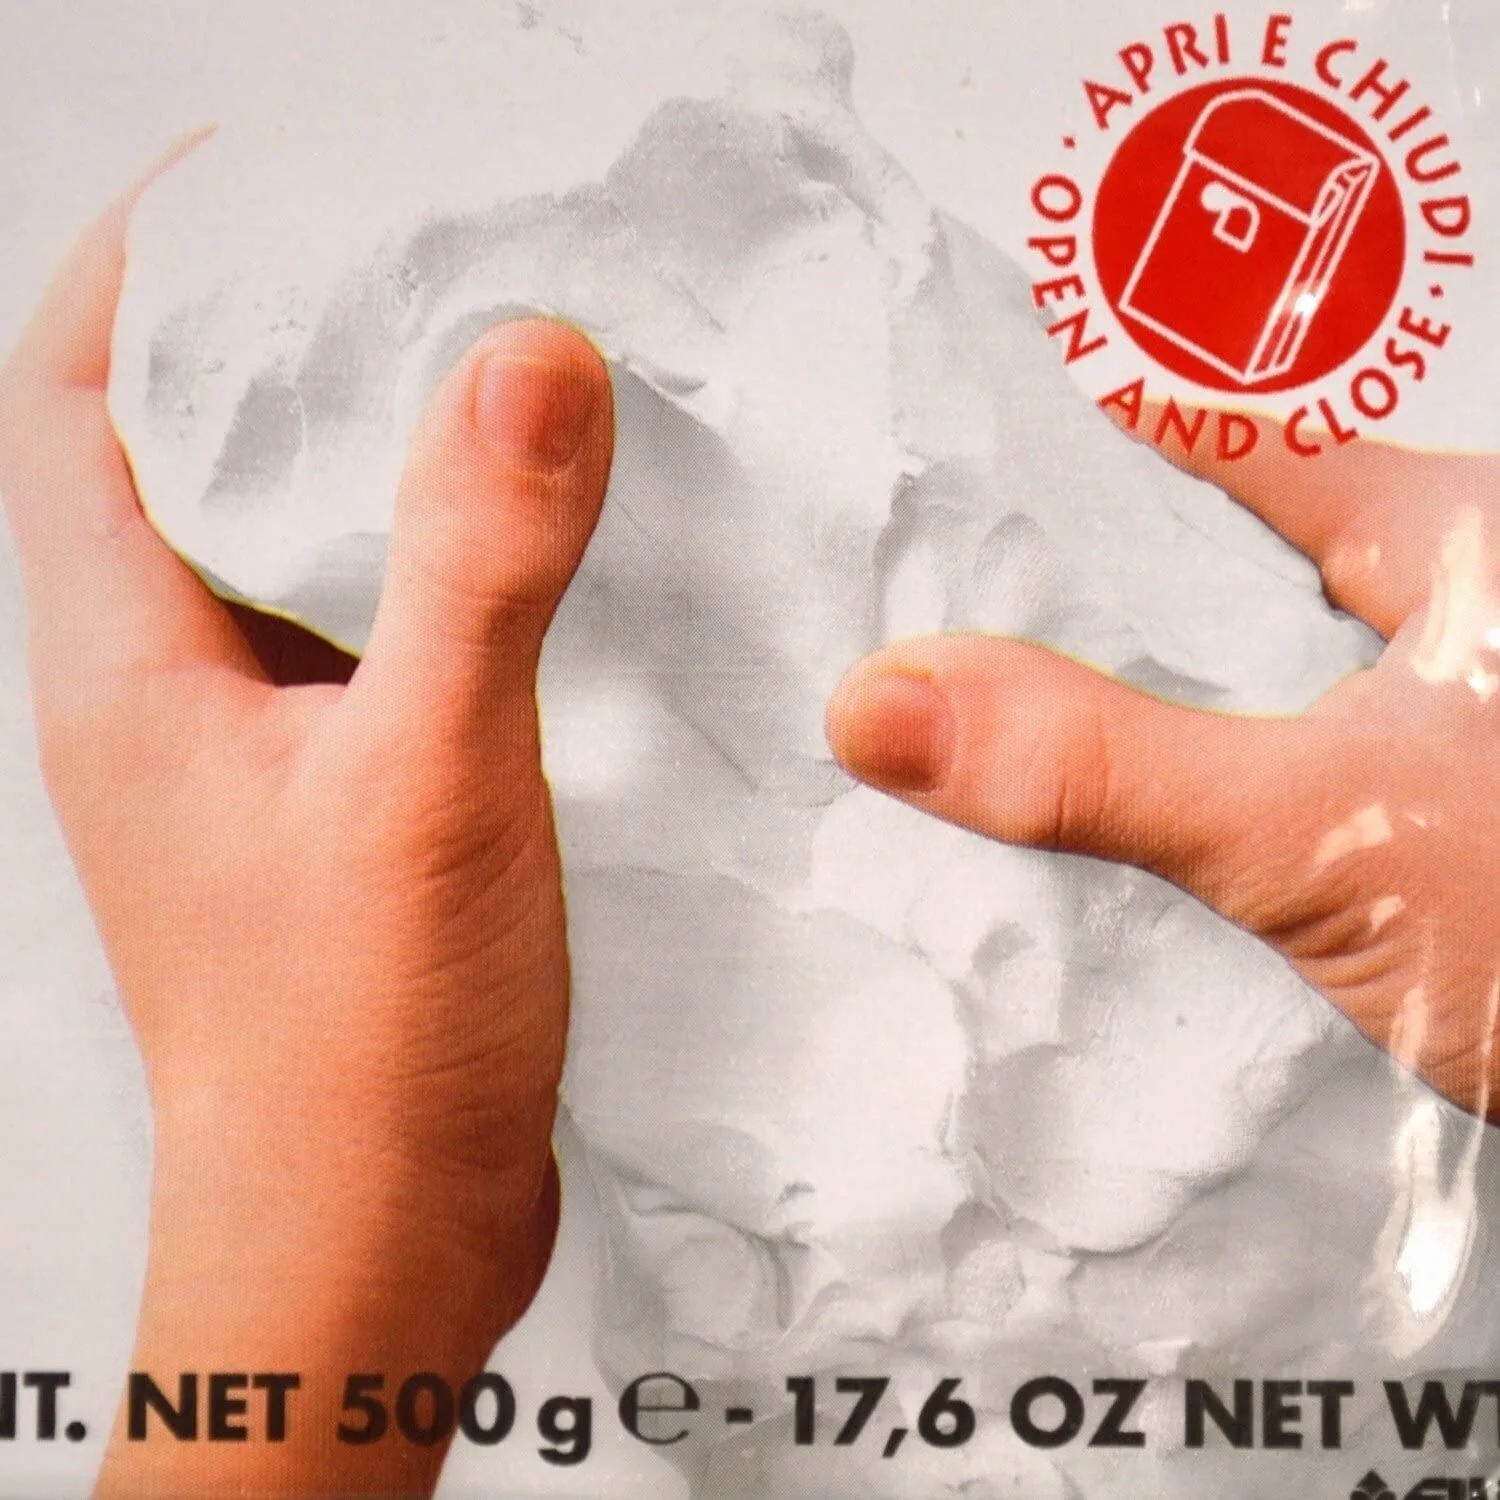 80g Hand Modeling Clay Air-dry Non-toxic Self-hardening Clay Mold Making,  White - Pottery & Ceramics Tools - AliExpress